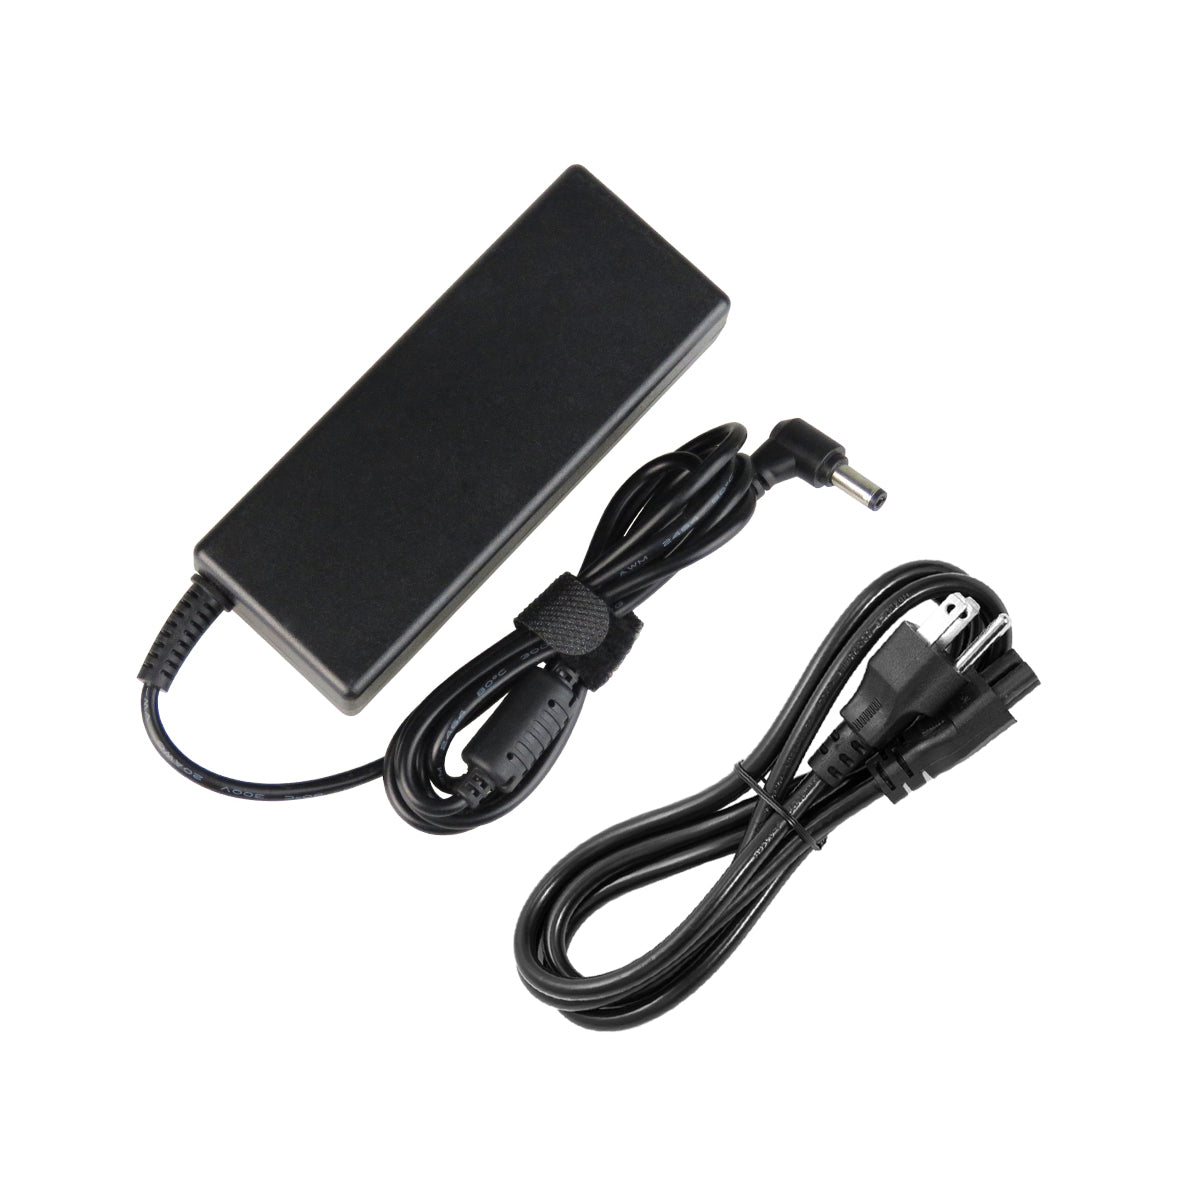 AC Adapter Charger for ASUS X52S Notebook.